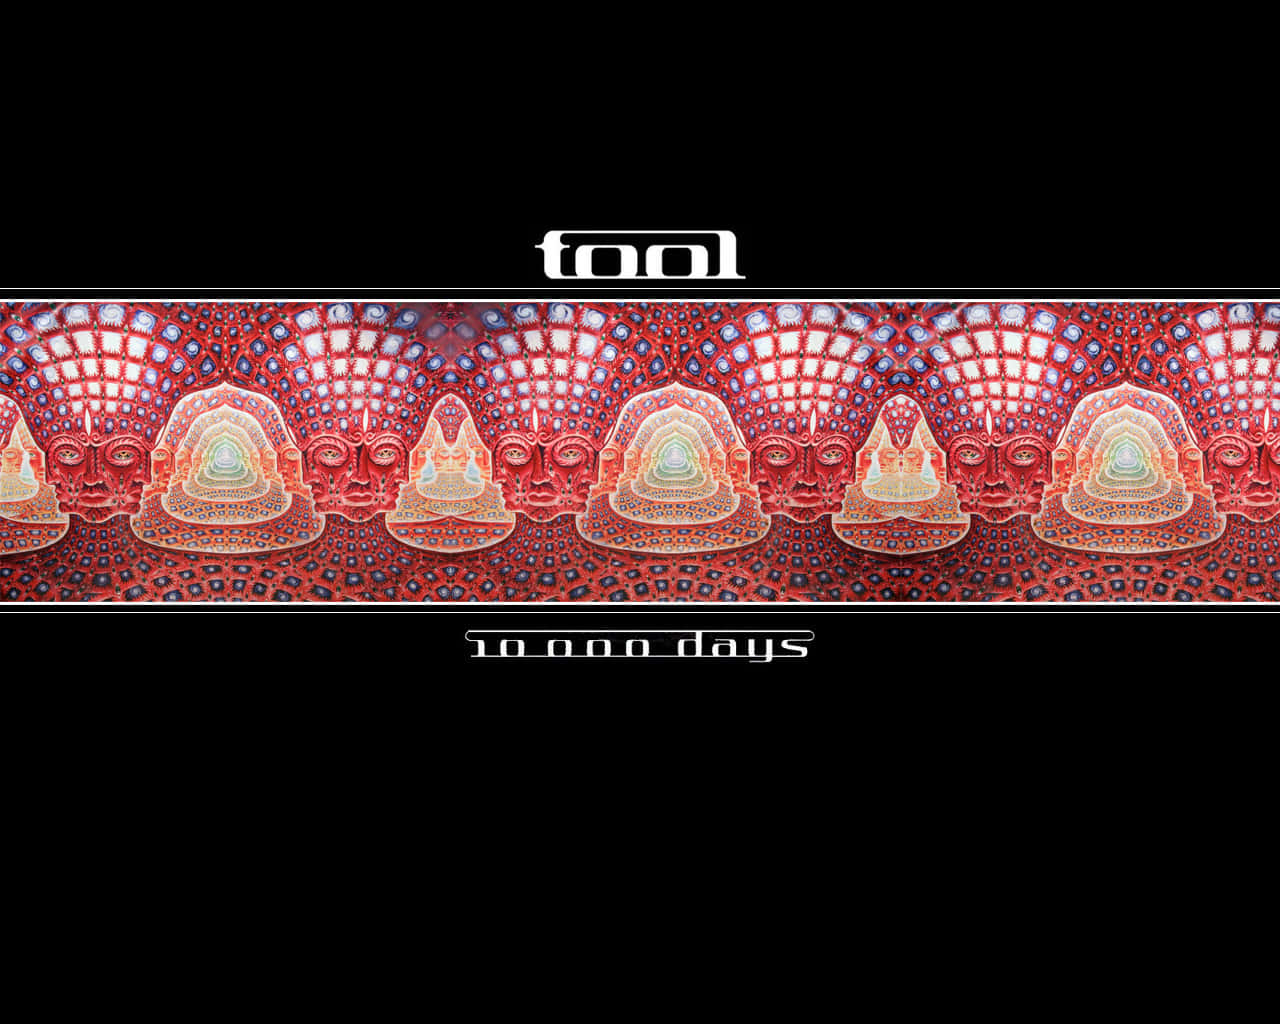 Tool Band - Music That gets Under Your Skin Wallpaper